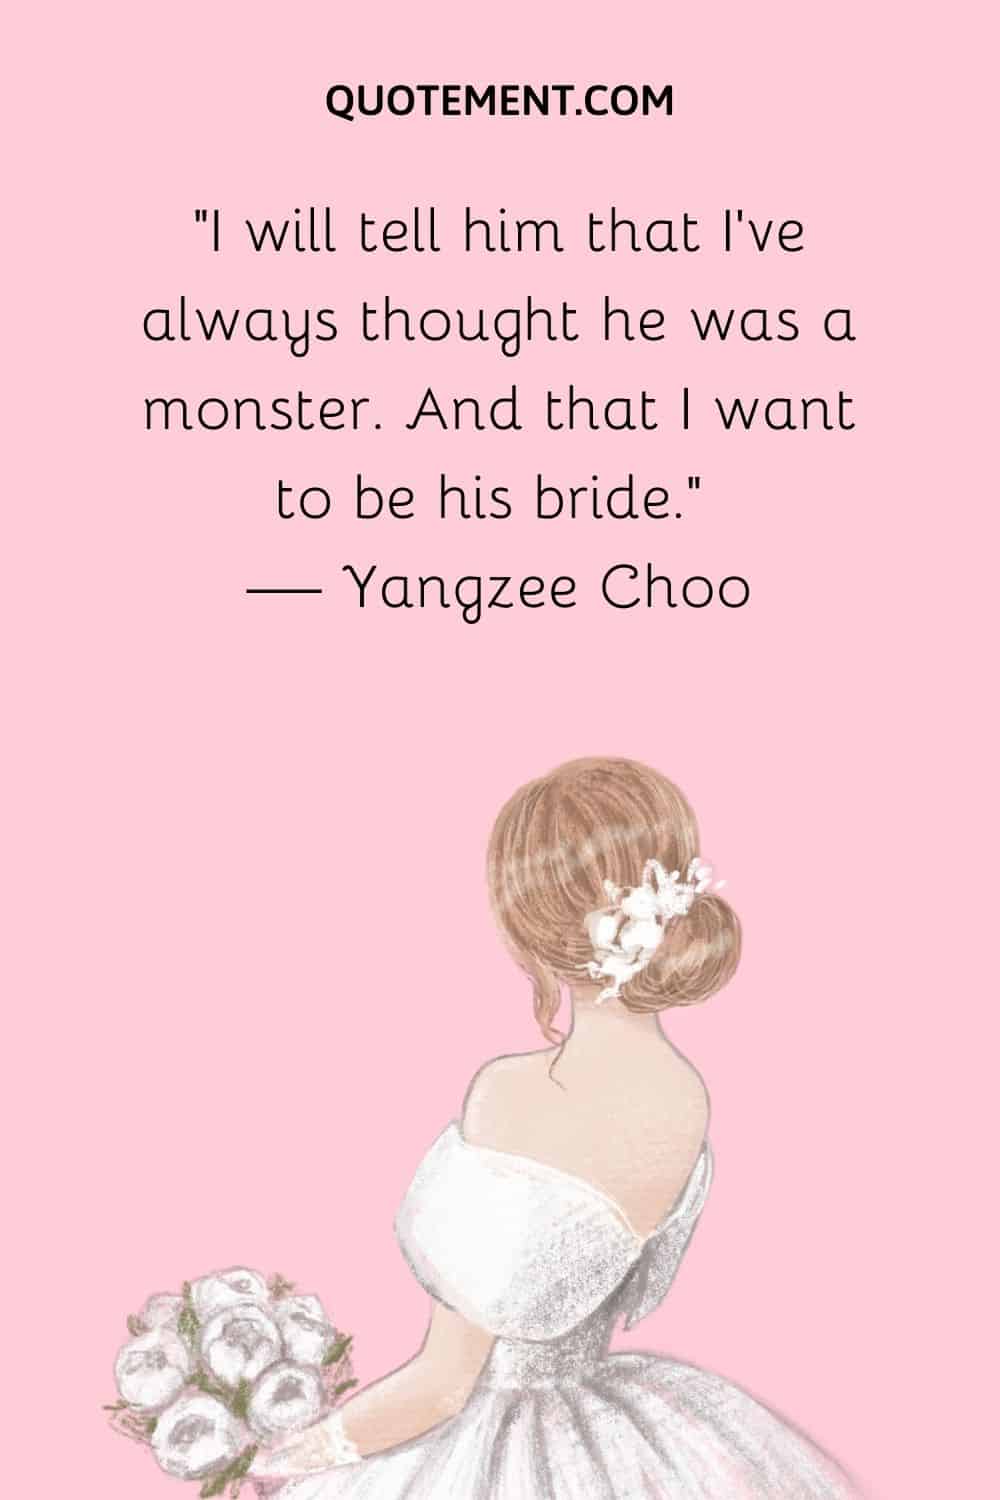 I will tell him that I've always thought he was a monster. And that I want to be his bride. — Yangzee Choo